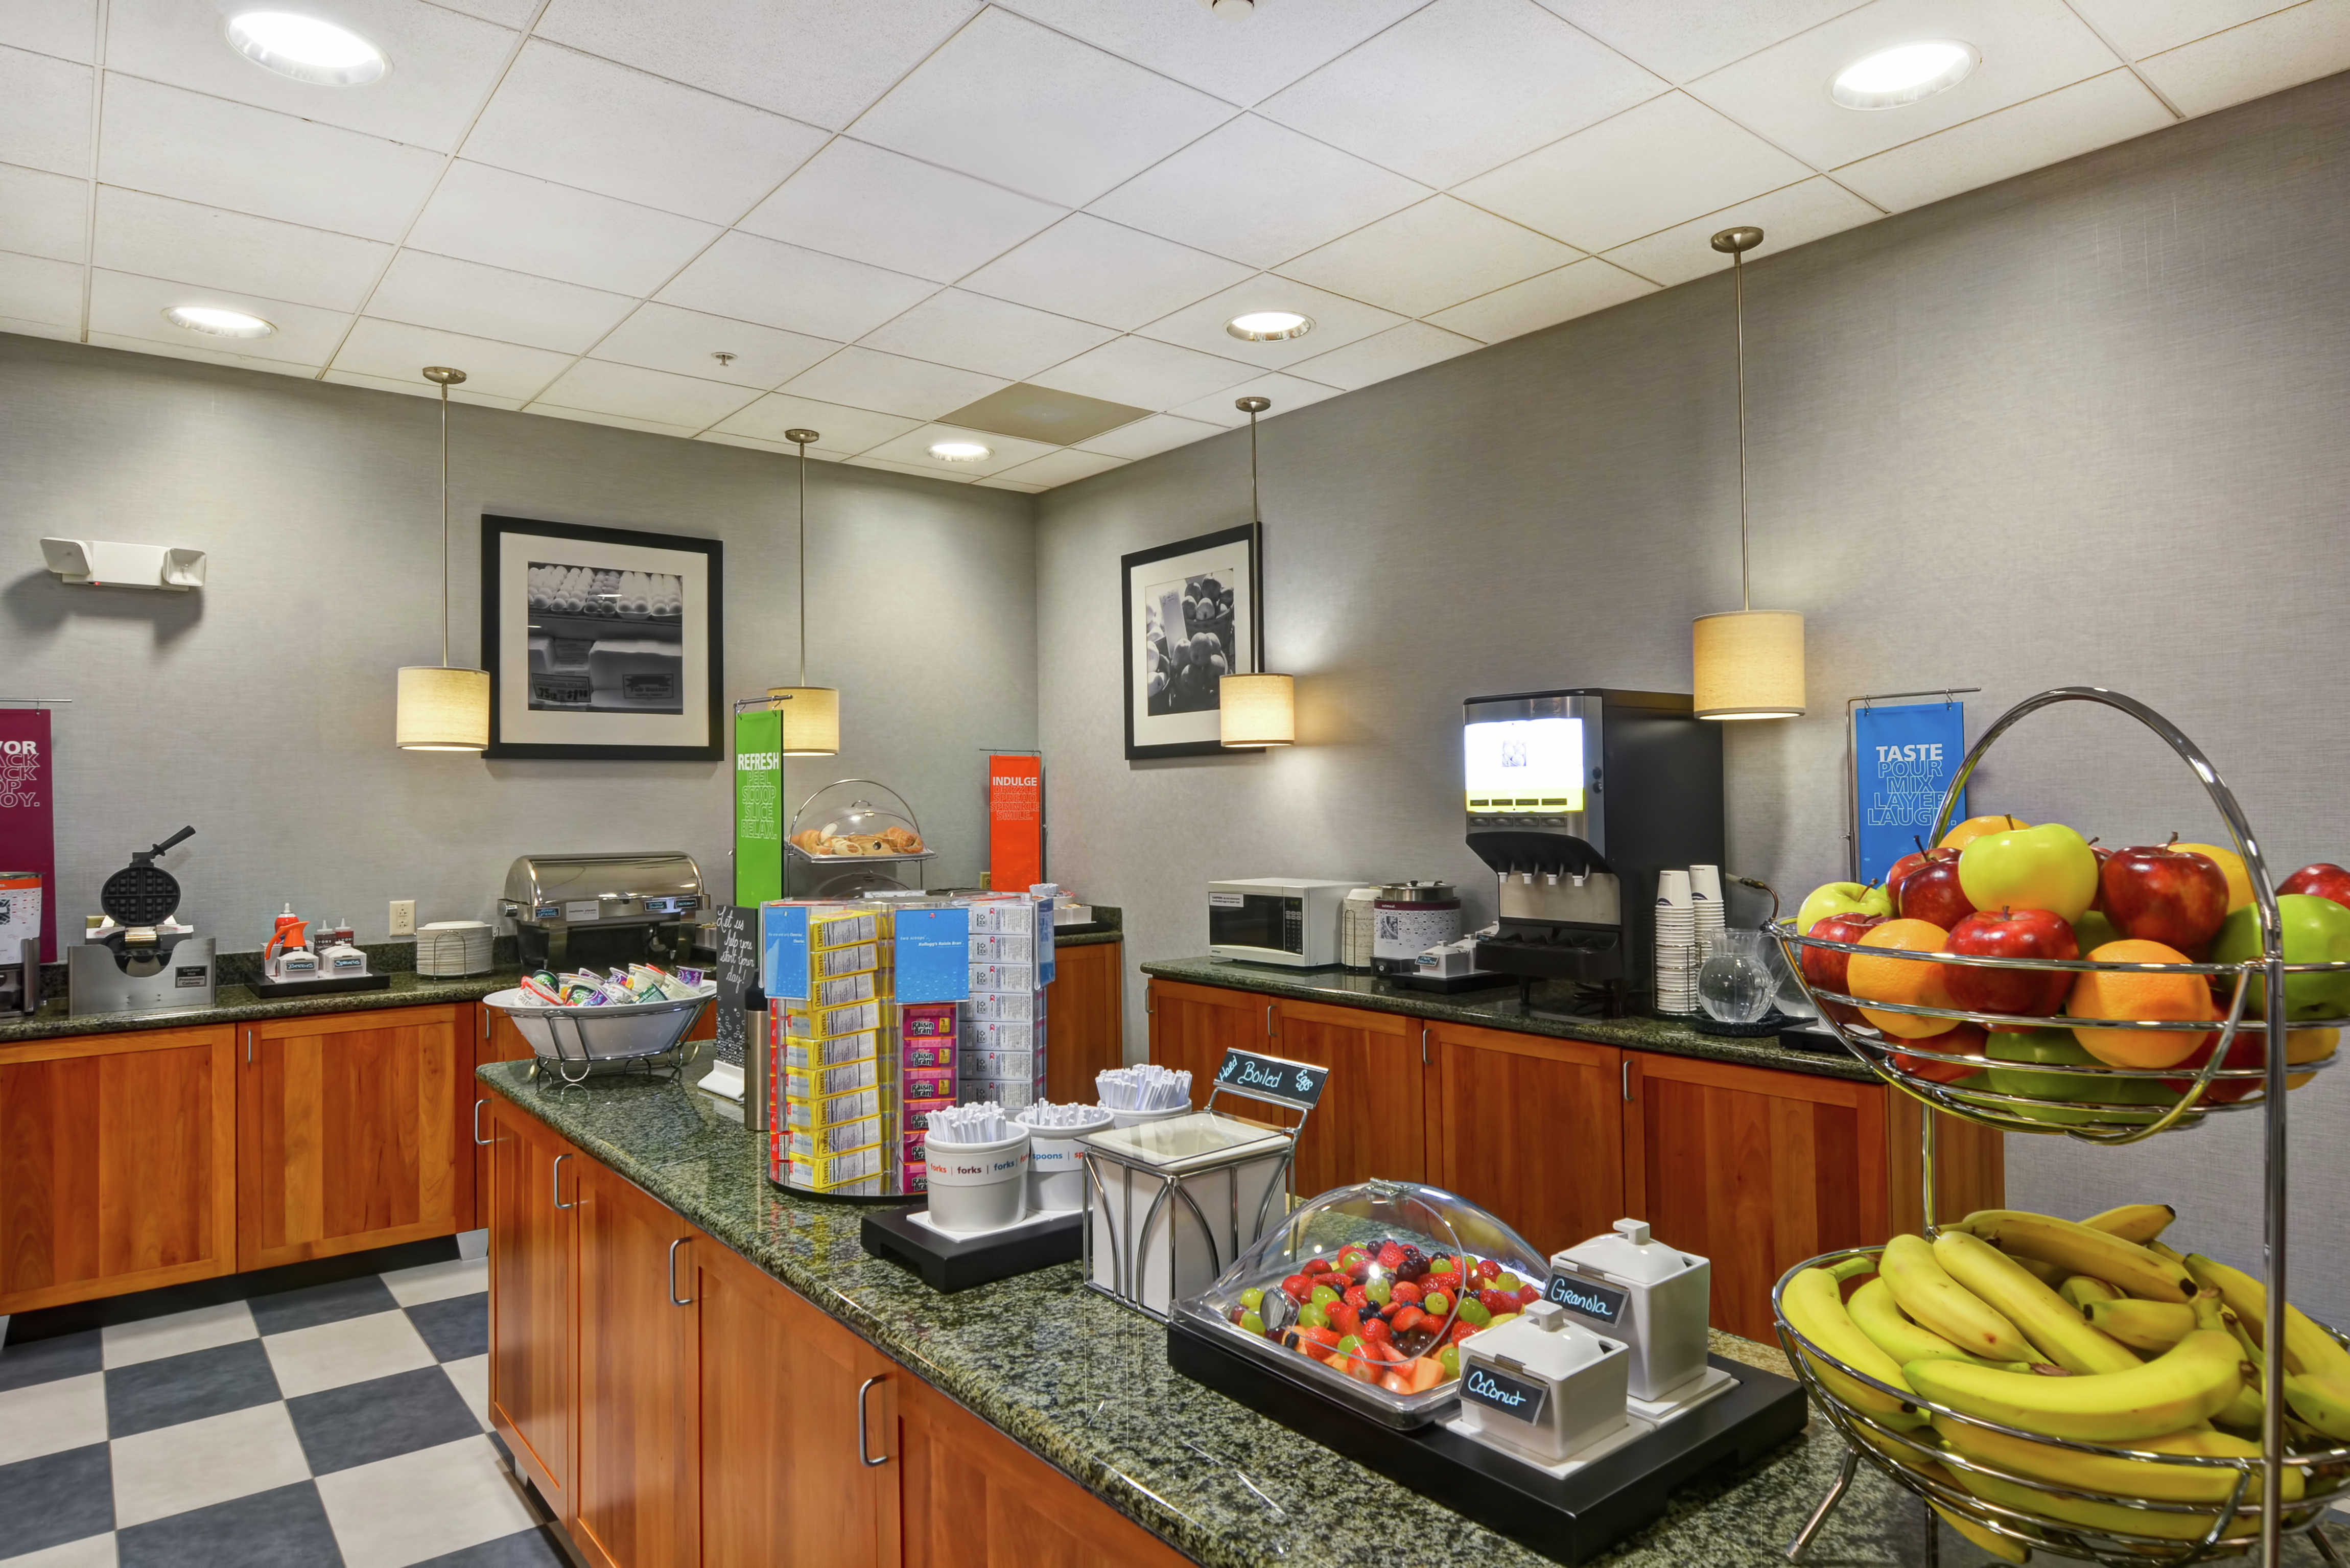 Breakfast Buffet Area with Fresh Fruits